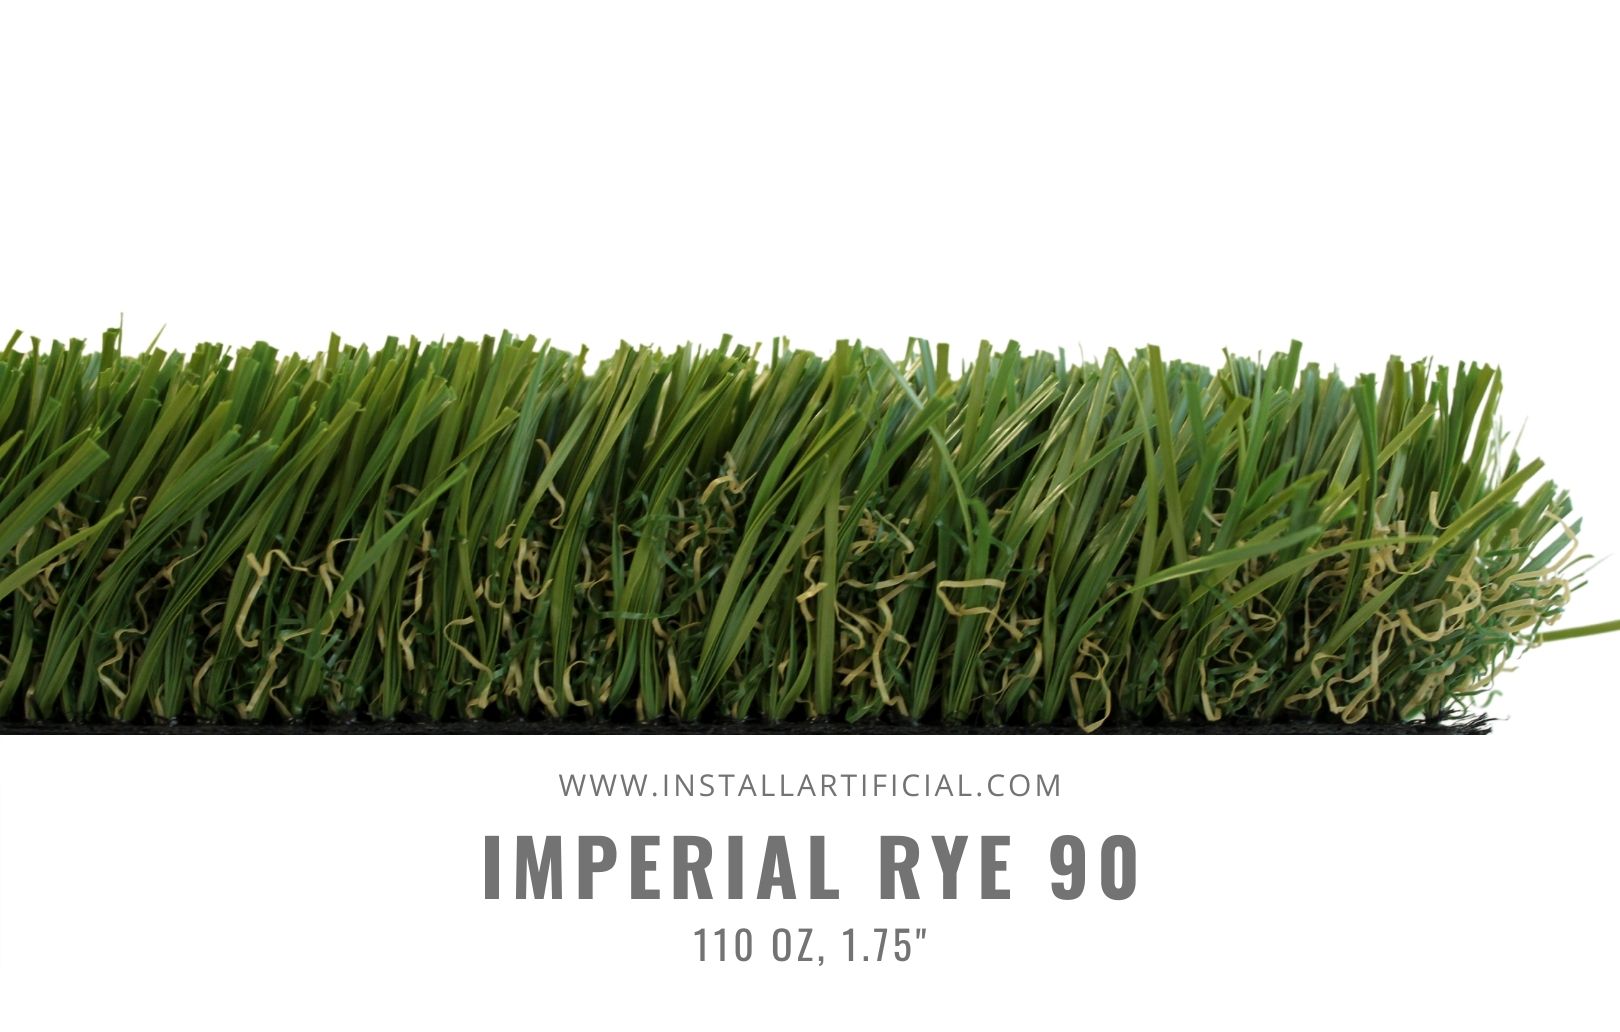 Imperial Rye 90, Imperial Synthetic Turf, side